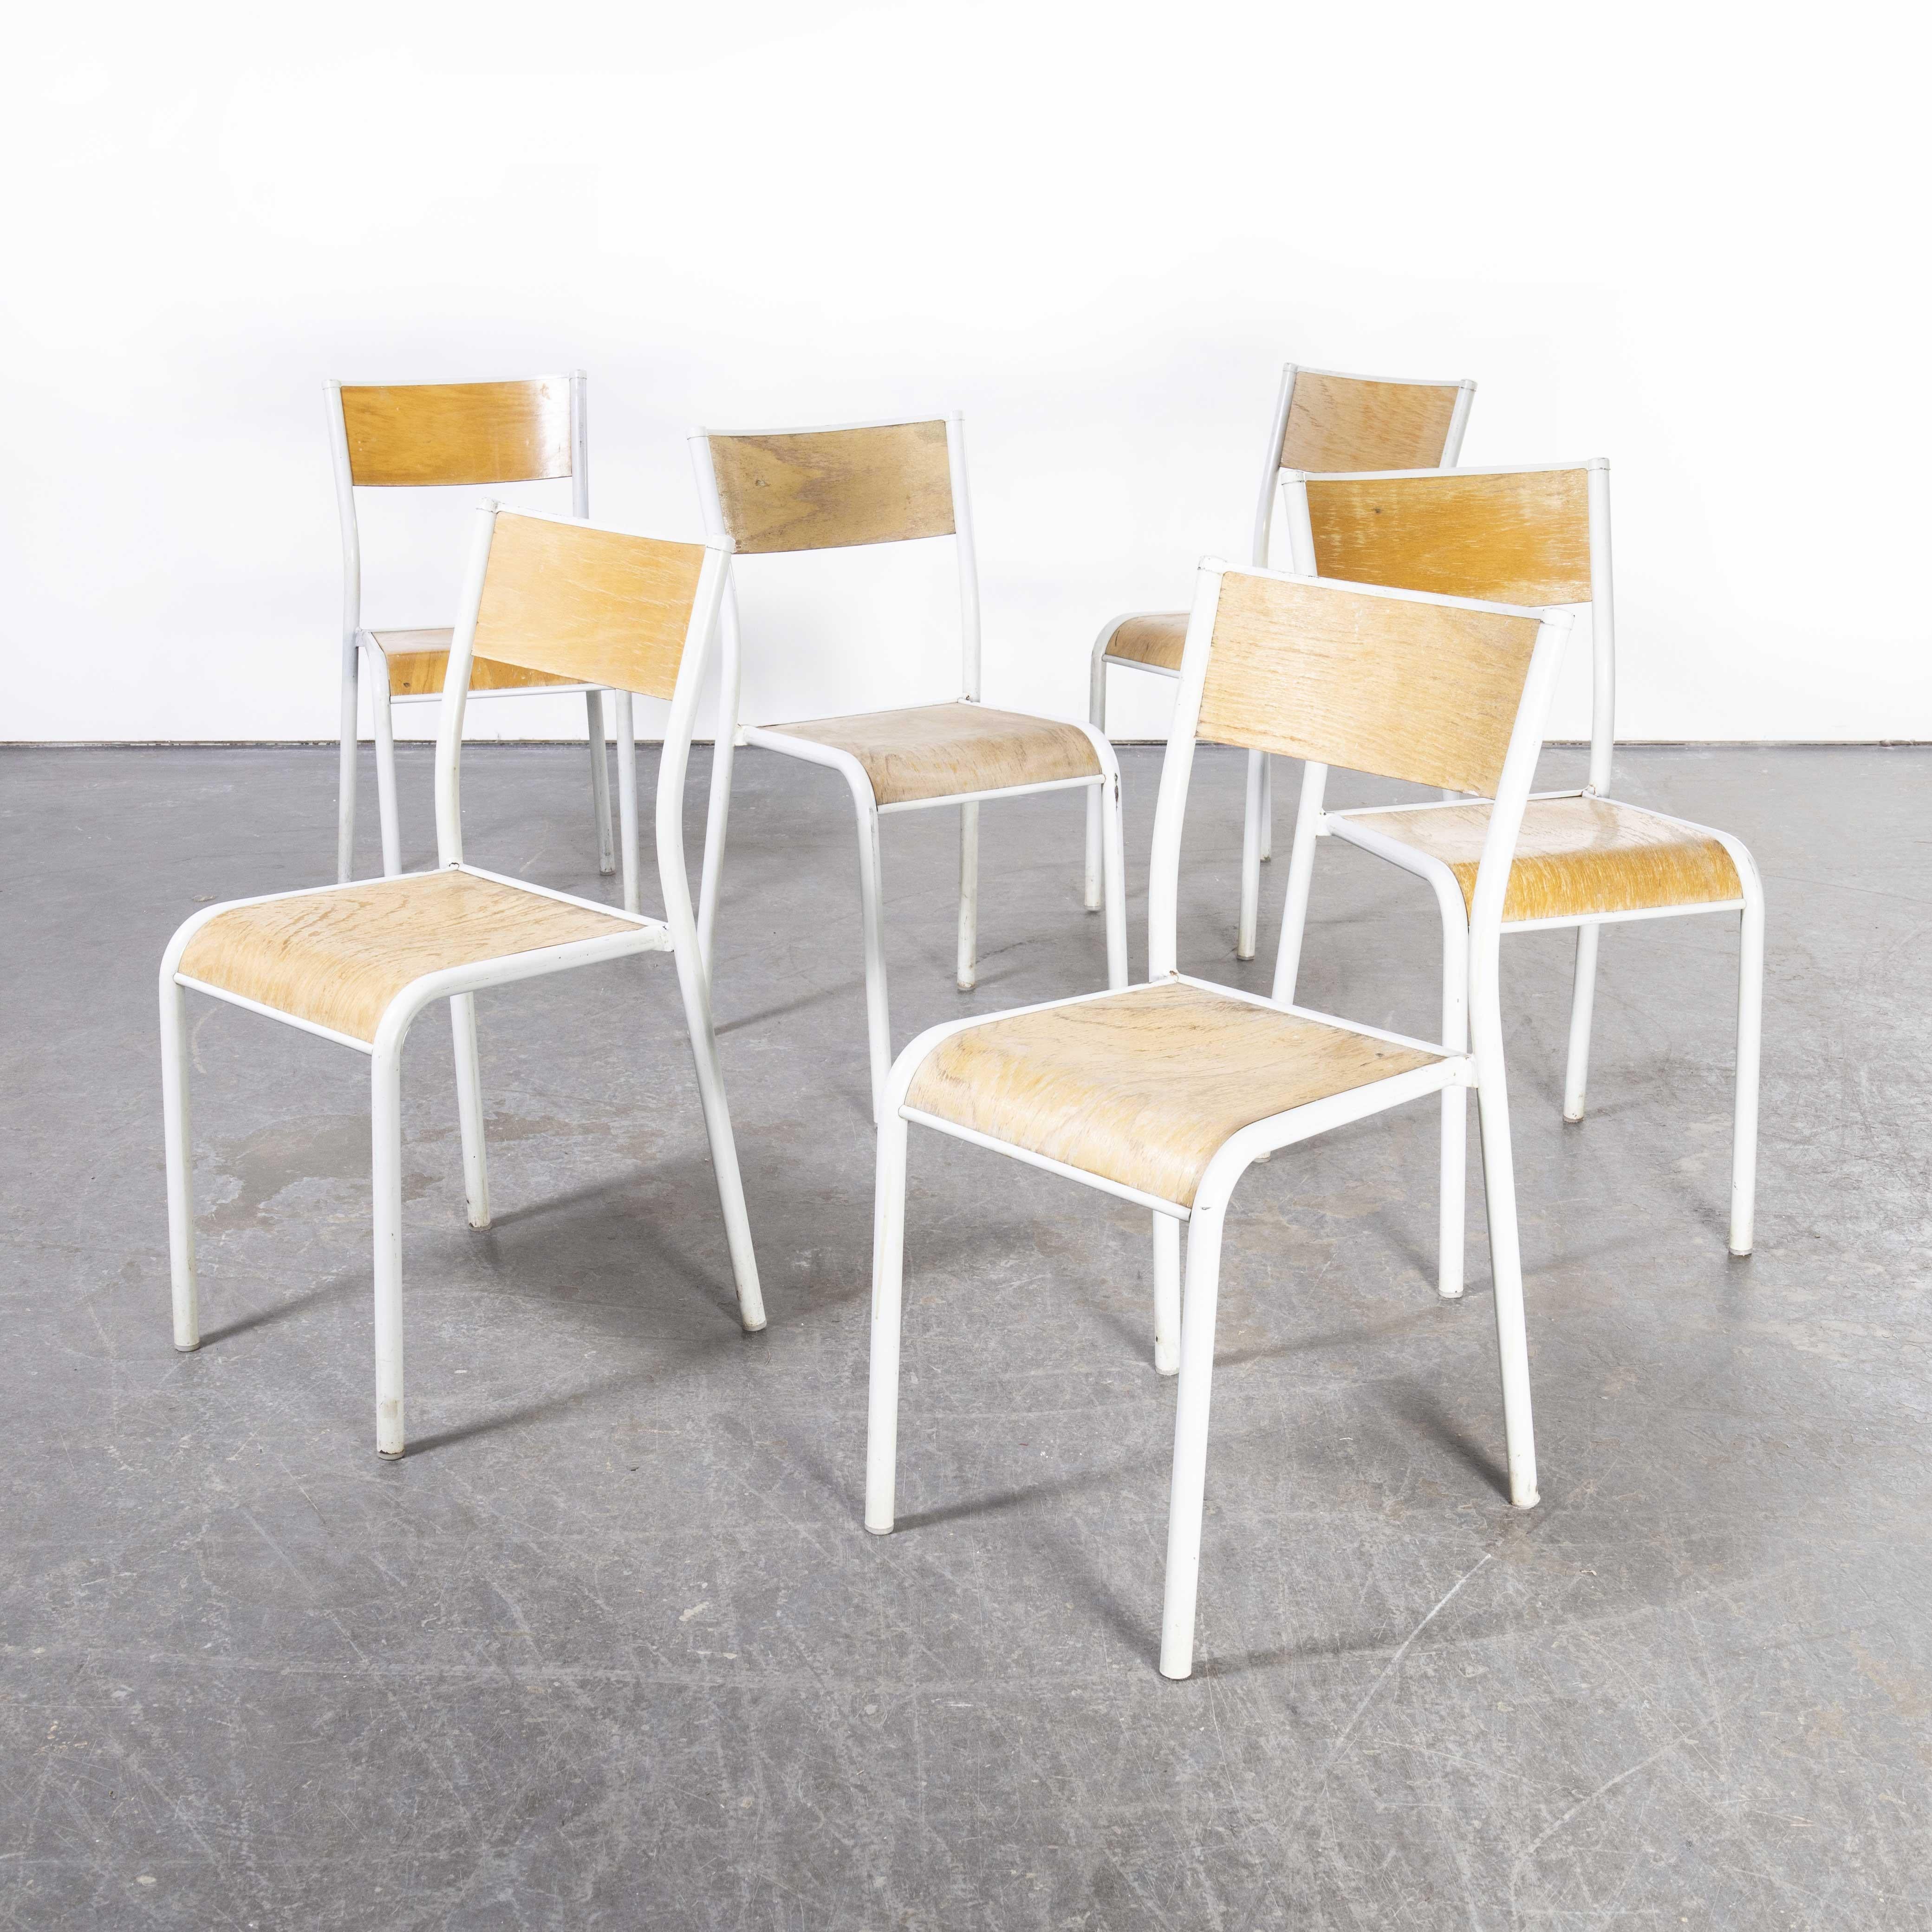 1950’s French Mullca Stacking School – dining chairs – White Model 510 – Set Of Six
1950’s French Mullca Stacking School – dining chairs – White Model 510 – Set Of Six. One of our most favourite chairs, in 1947 Robert Muller and Gaston Cavaillon